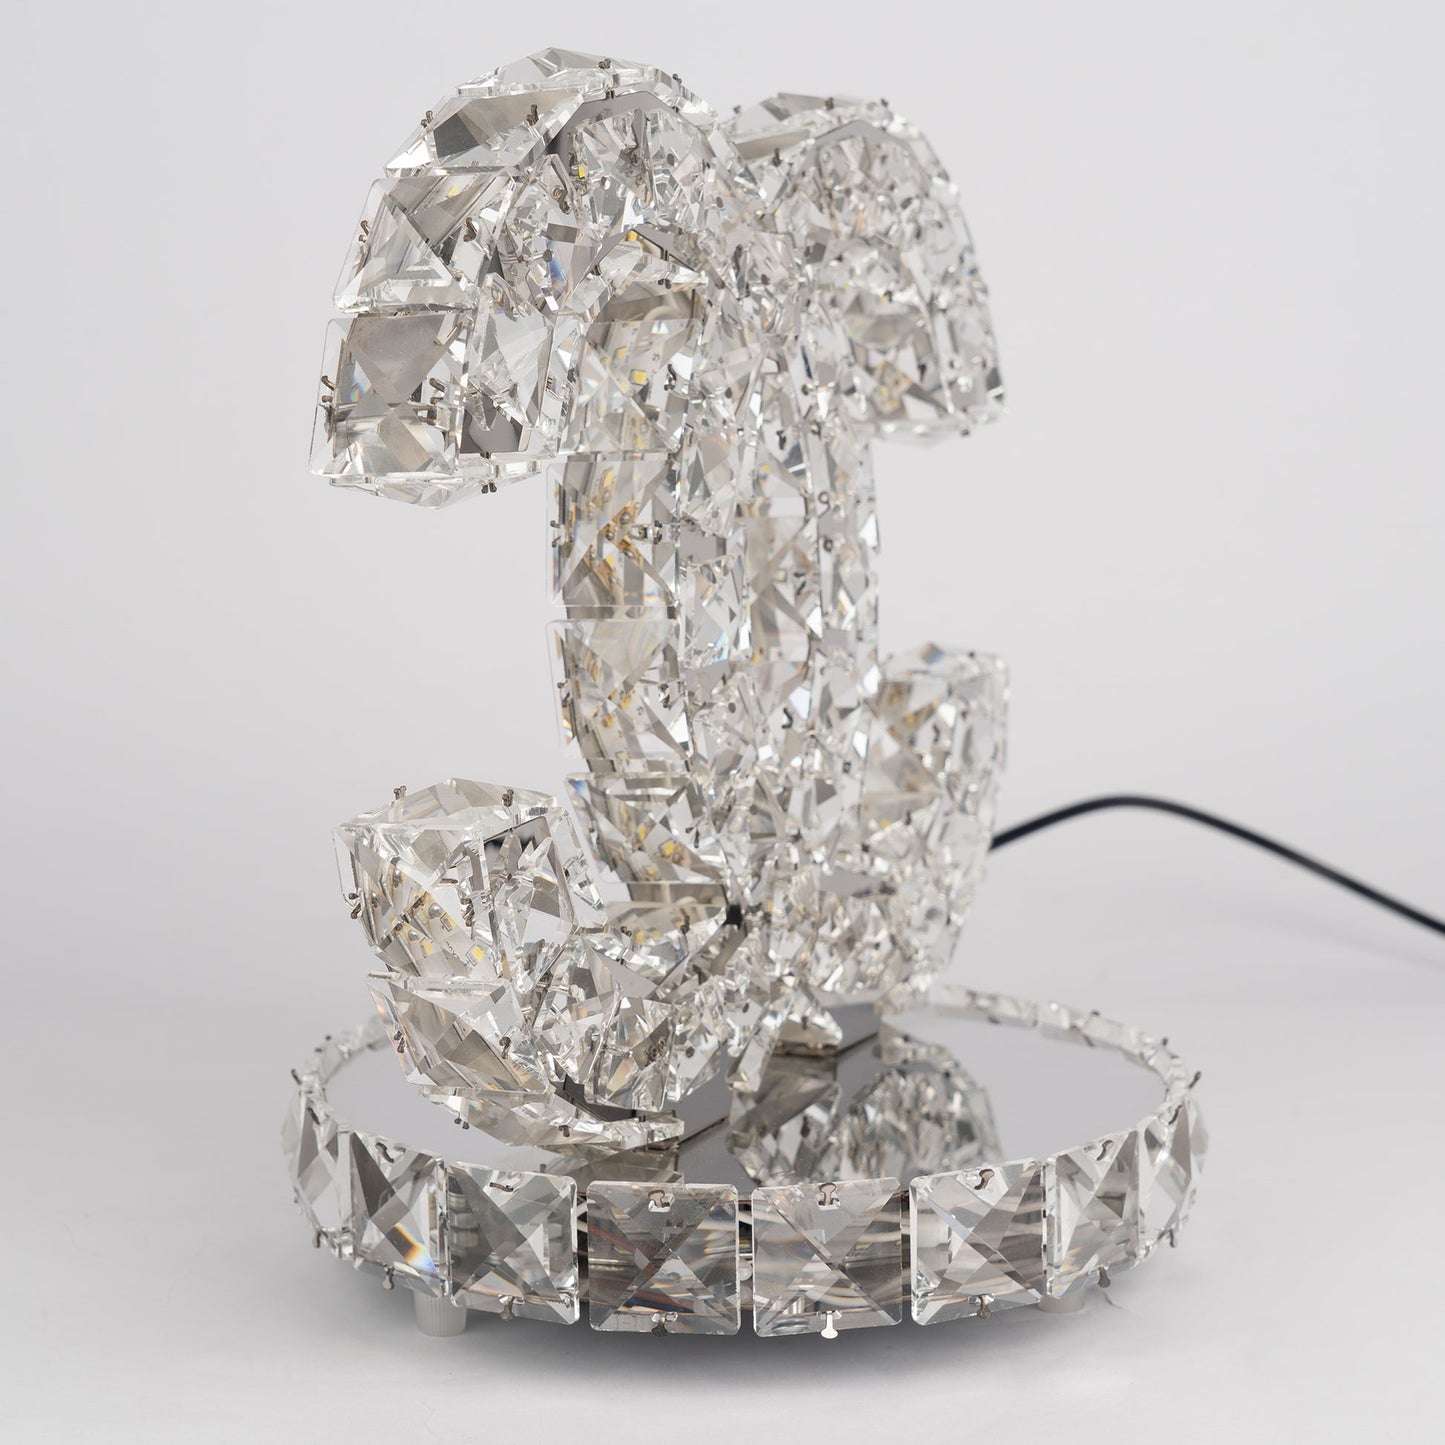 Stainless steel Crystal Table Lamp